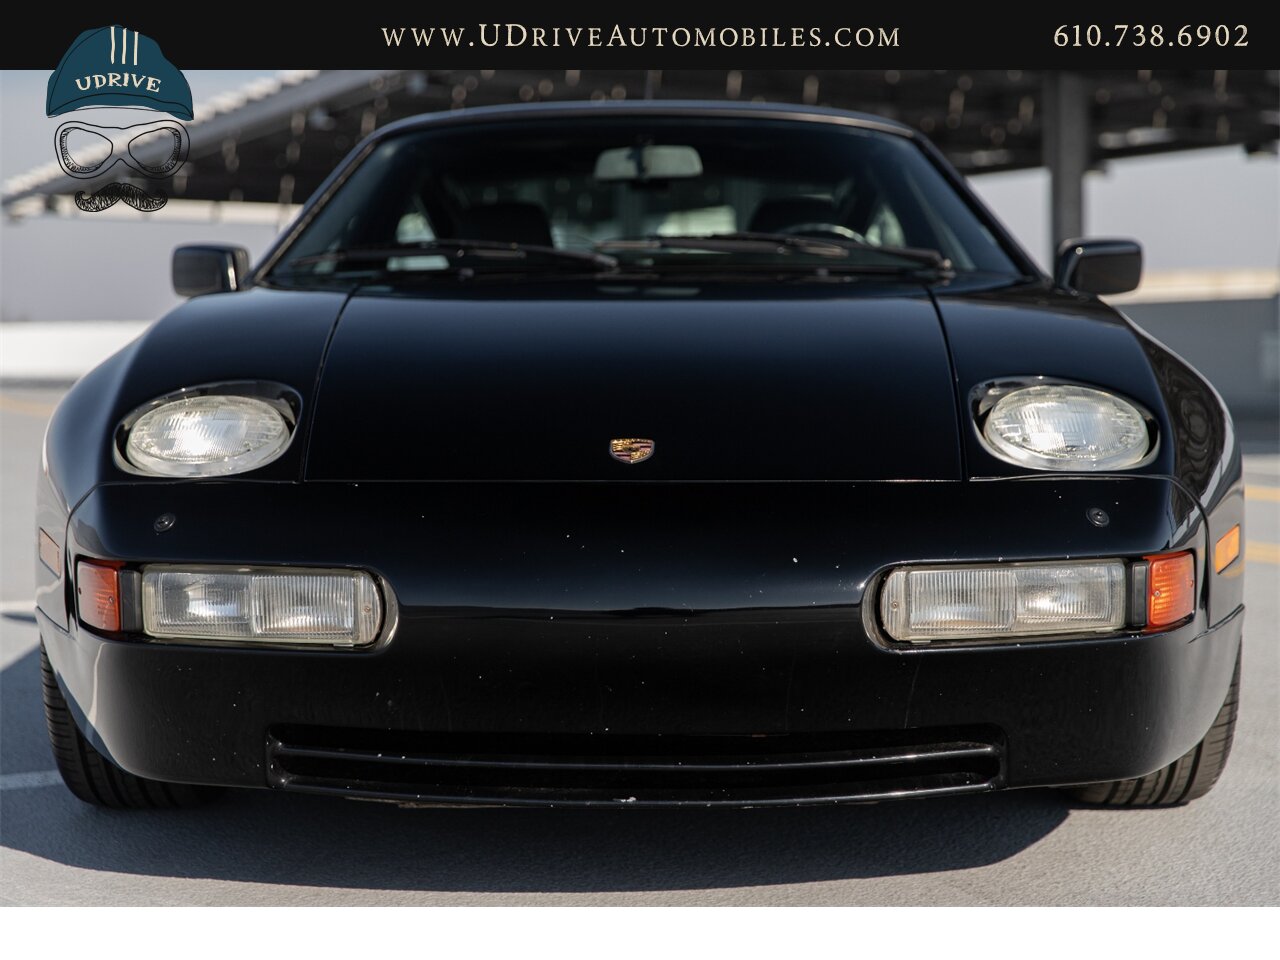 1990 Porsche 928 S4 $58k in Service History Since 2014   - Photo 11 - West Chester, PA 19382